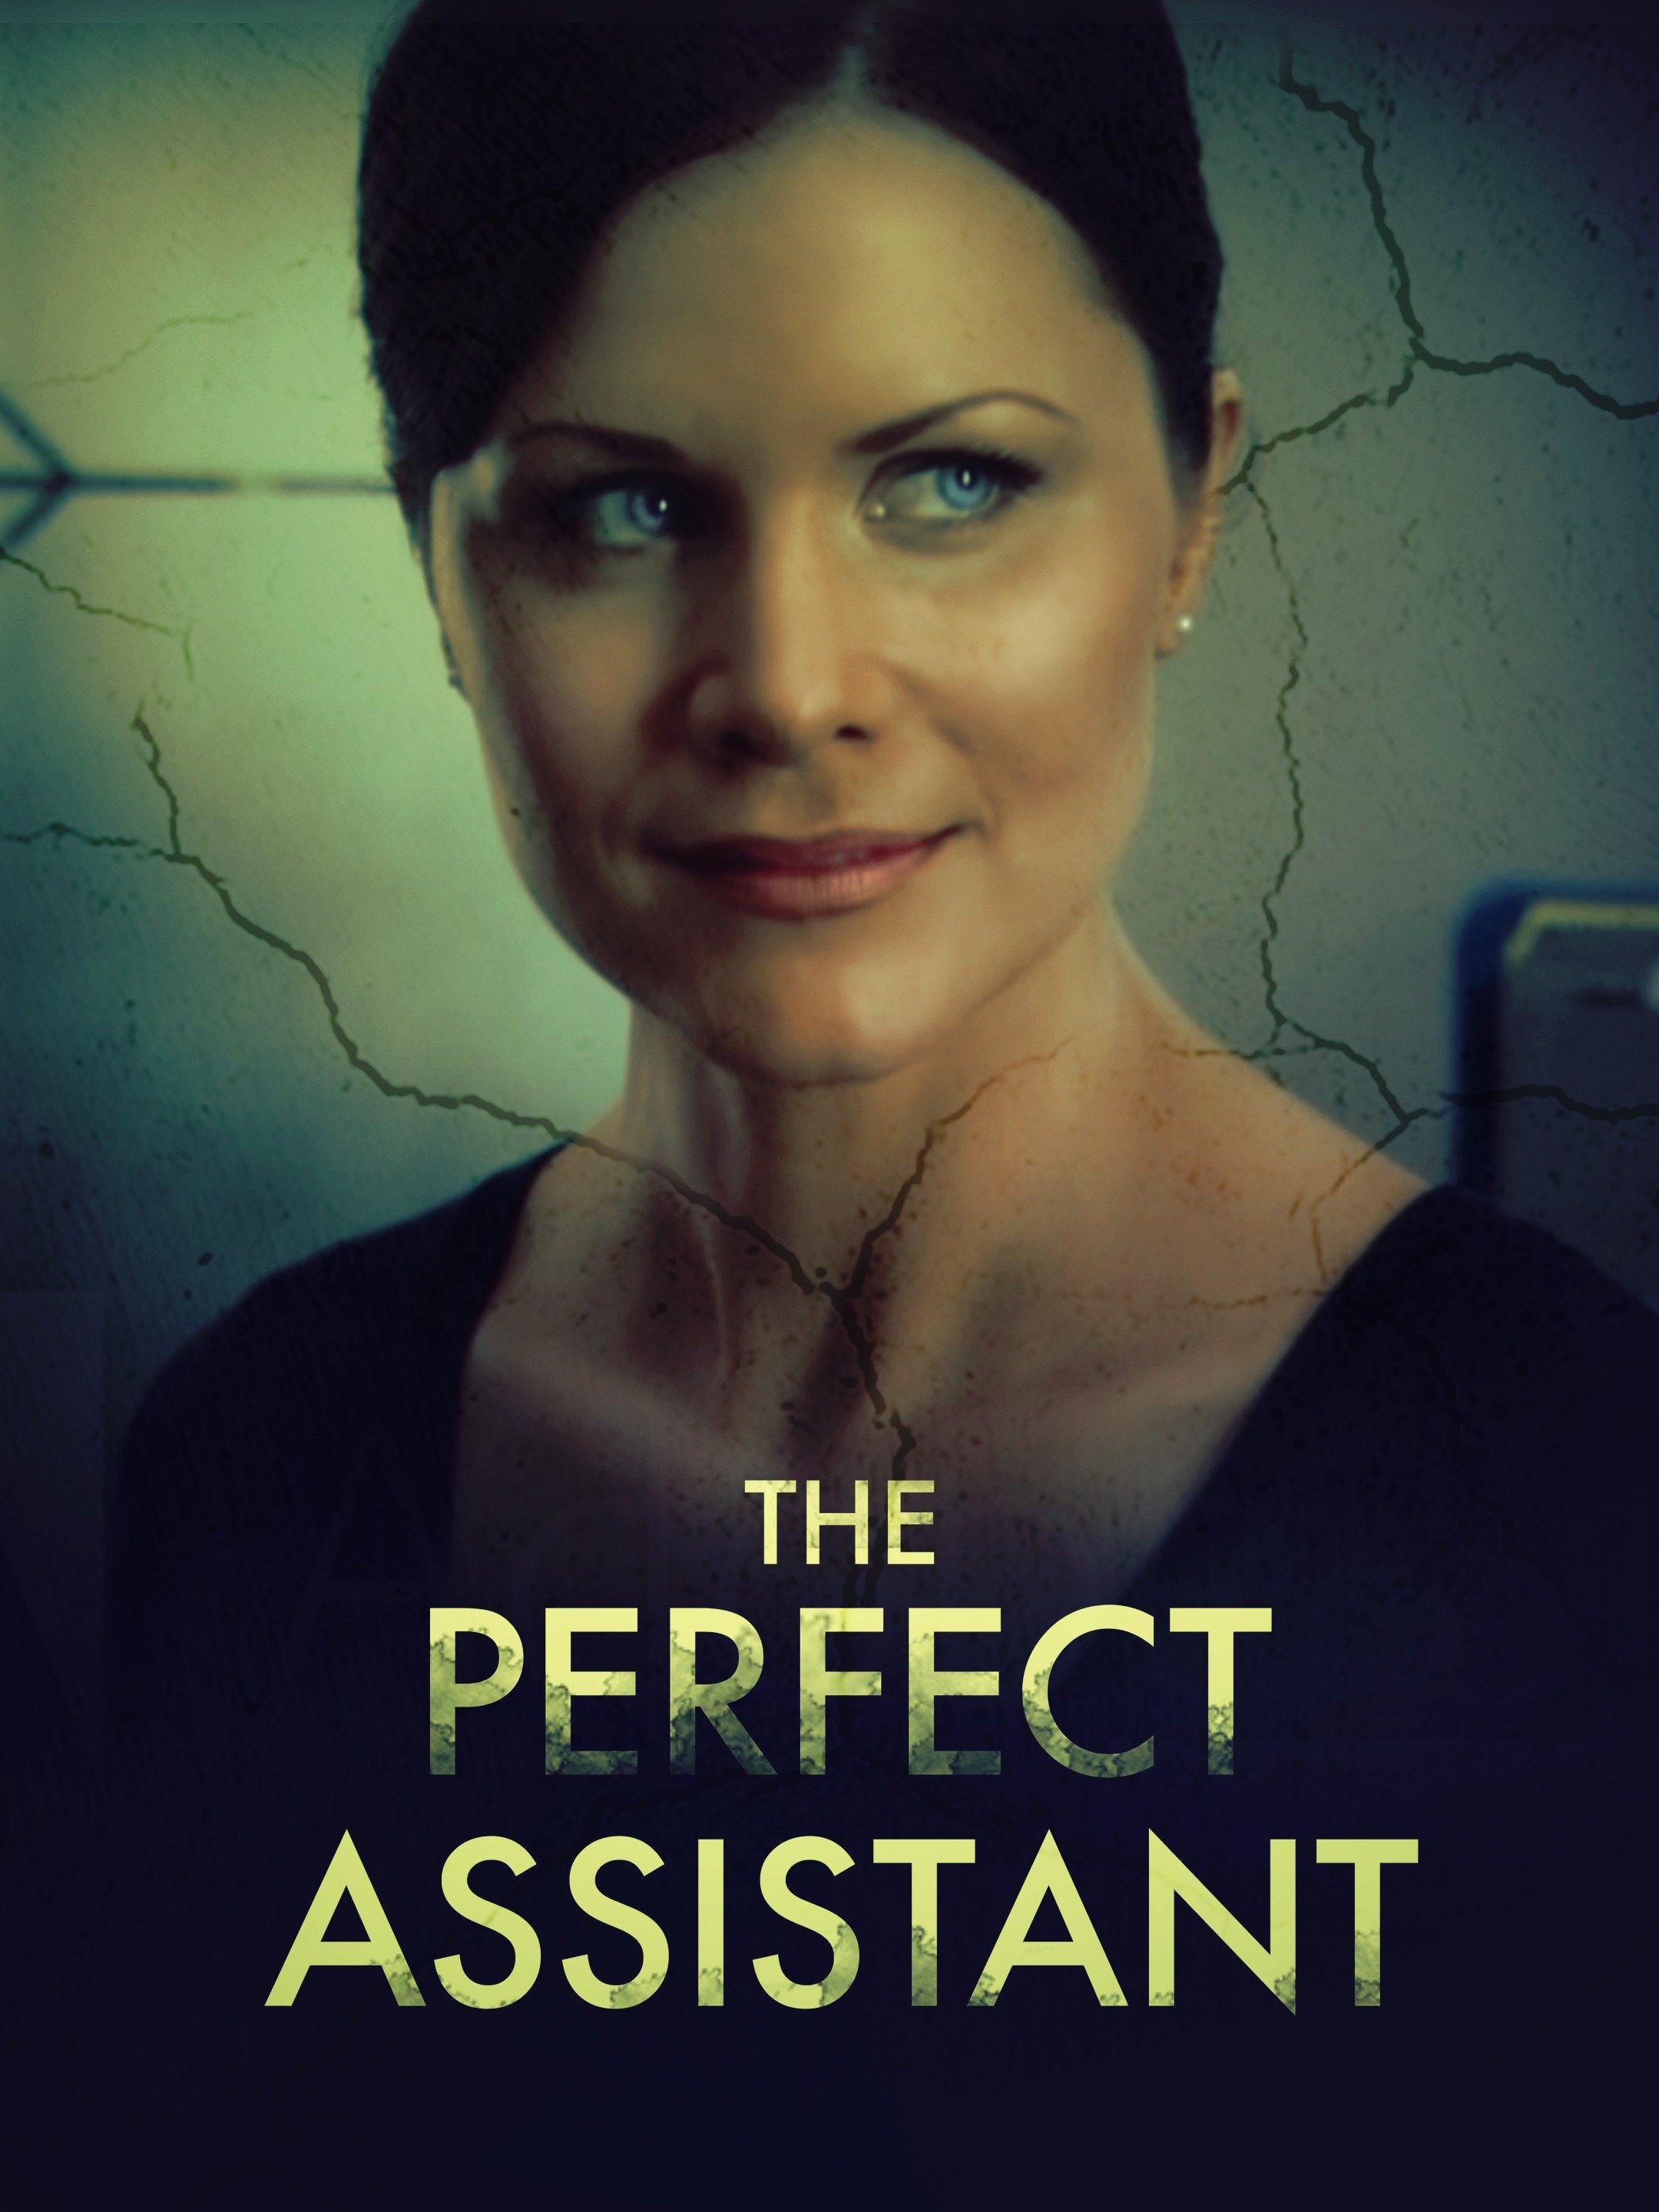 the perfect assistant trailer